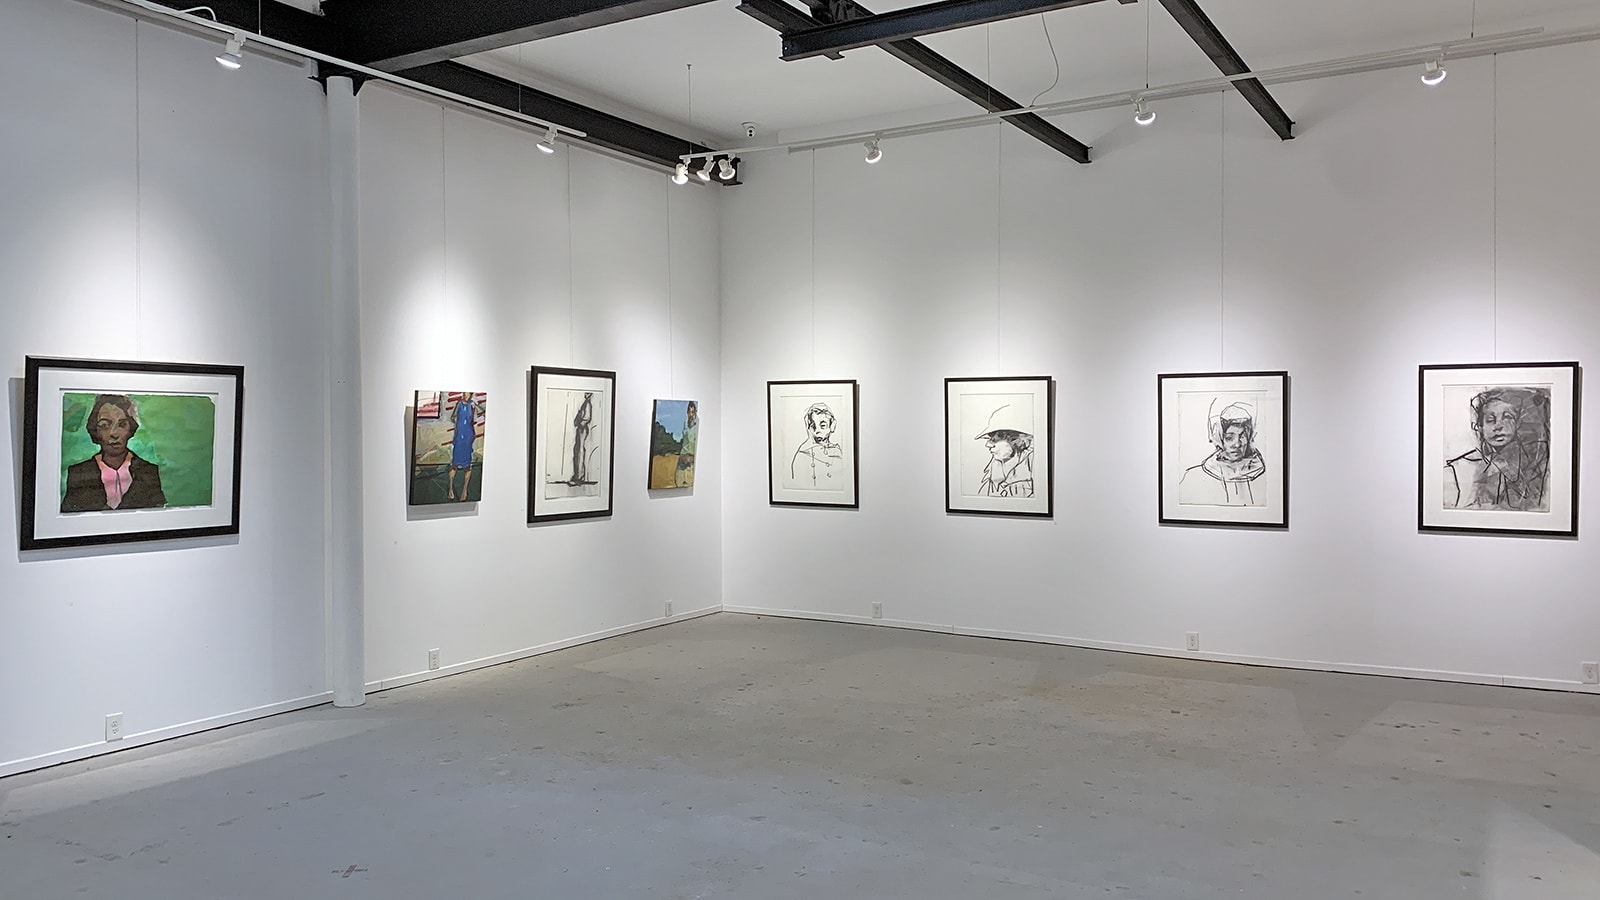 British artist Ruth Franklin exhibition of paintings and drawings at the Waddi art gallery in Atlanta